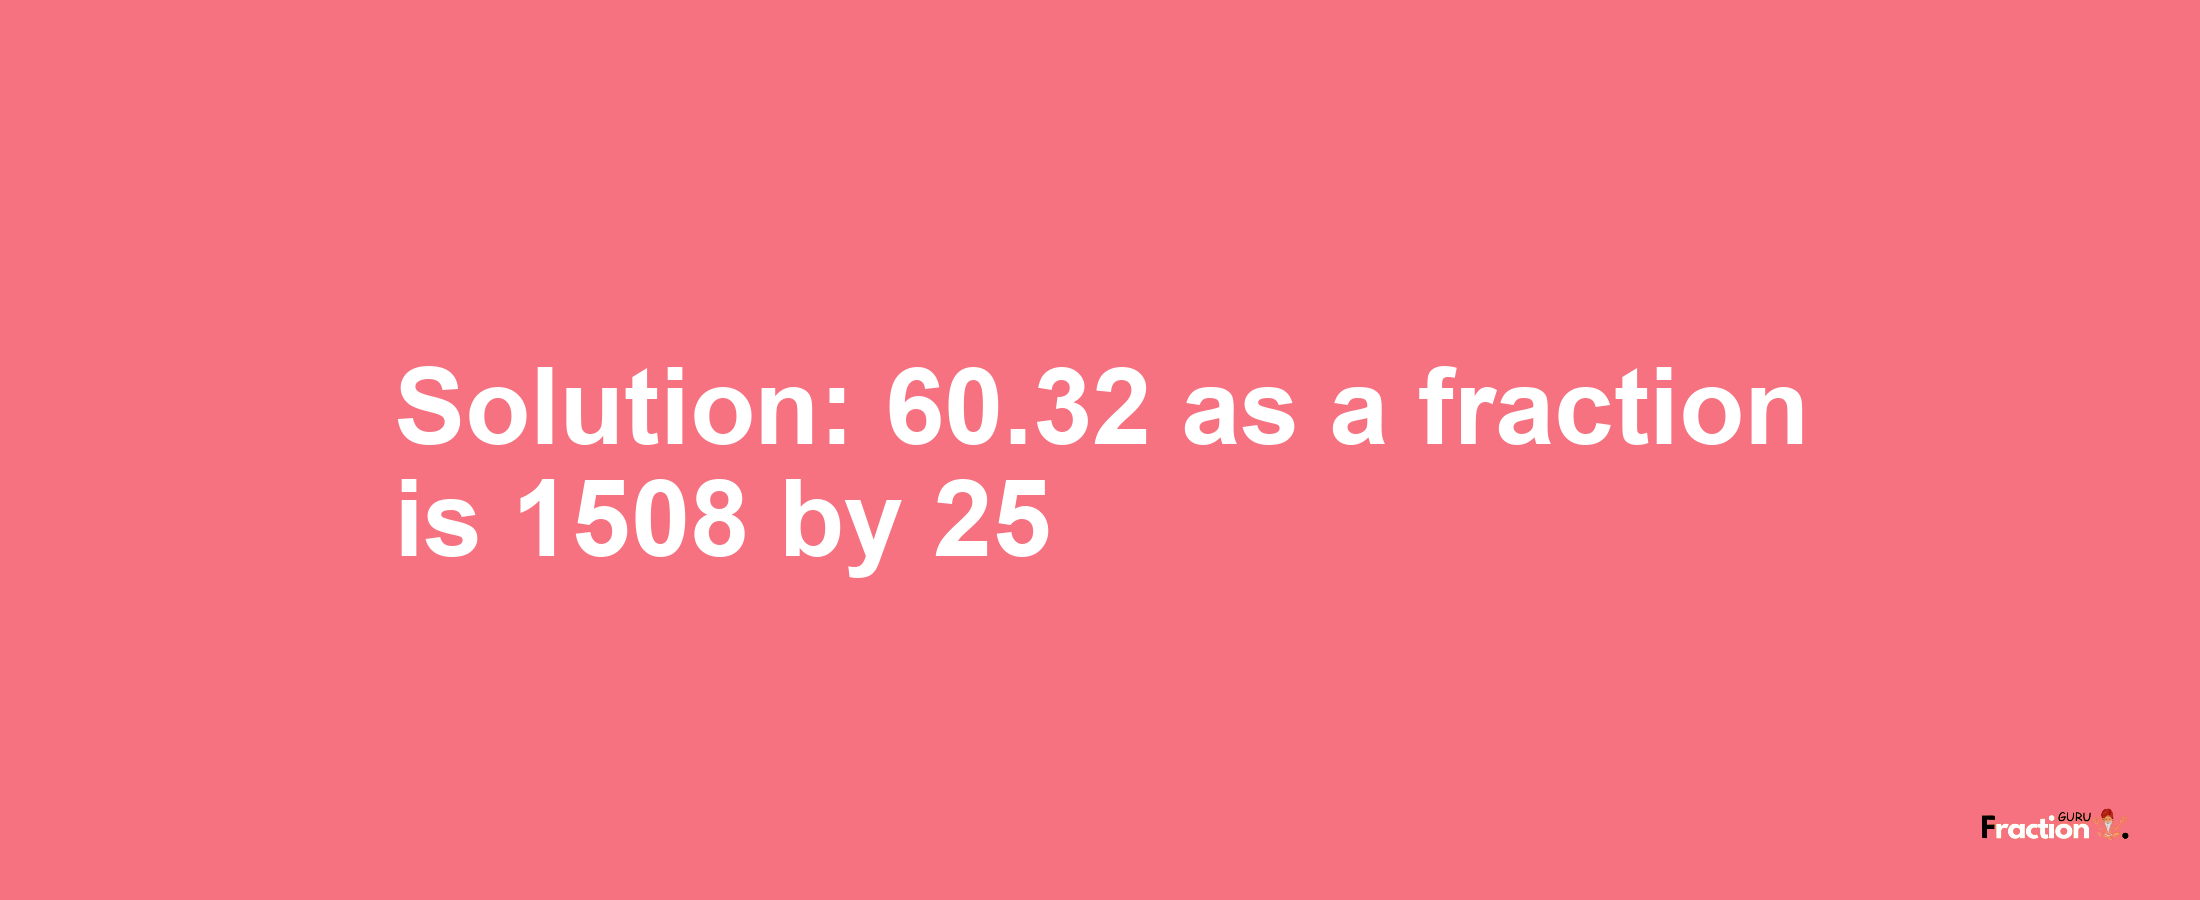 Solution:60.32 as a fraction is 1508/25